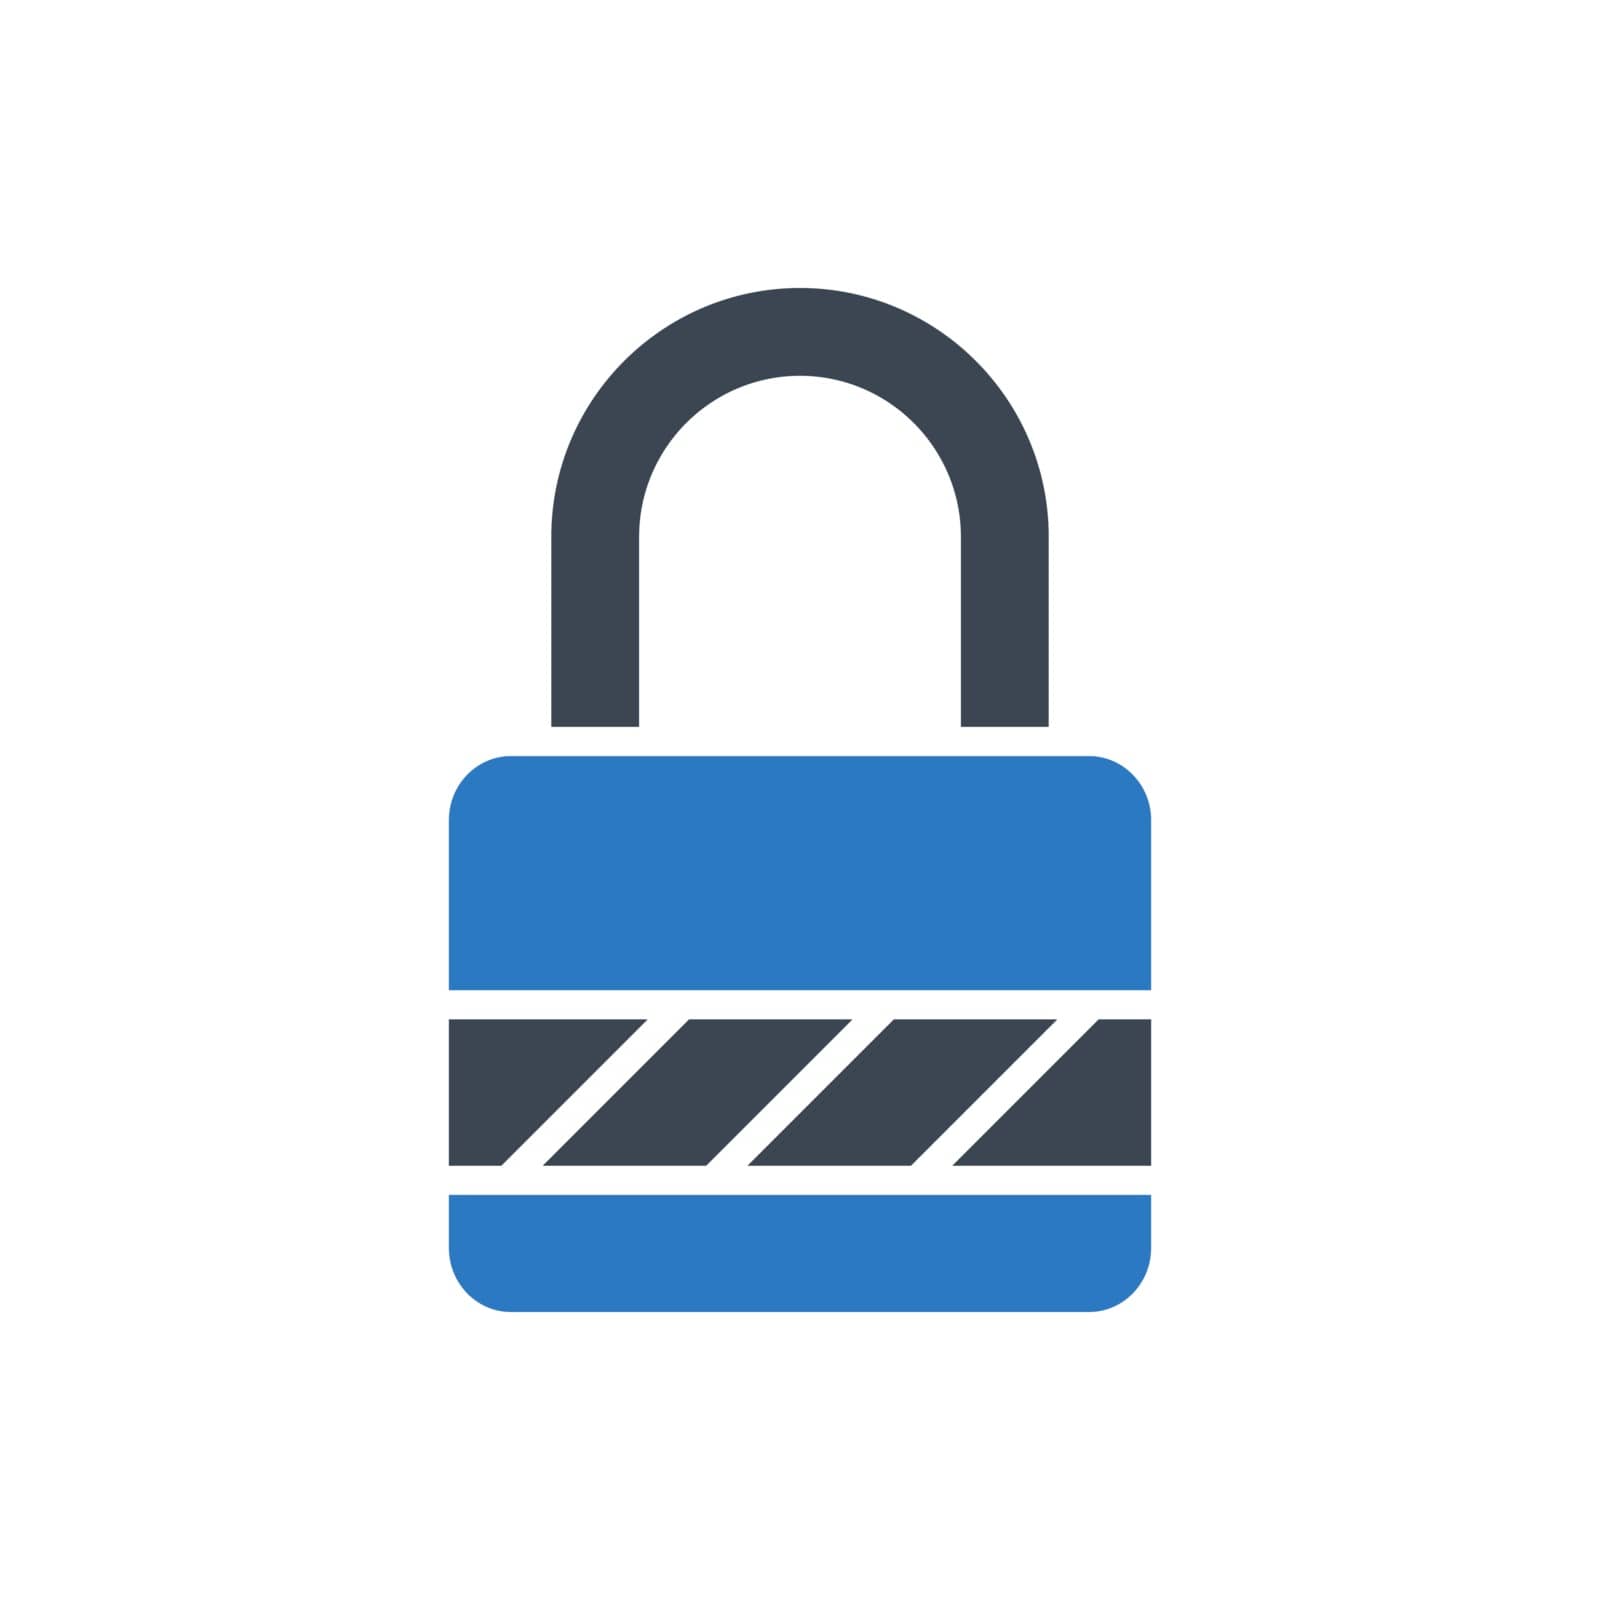 Padlock Related Vector Glyph Icon. Isolated on White Background. Vector Illustration.